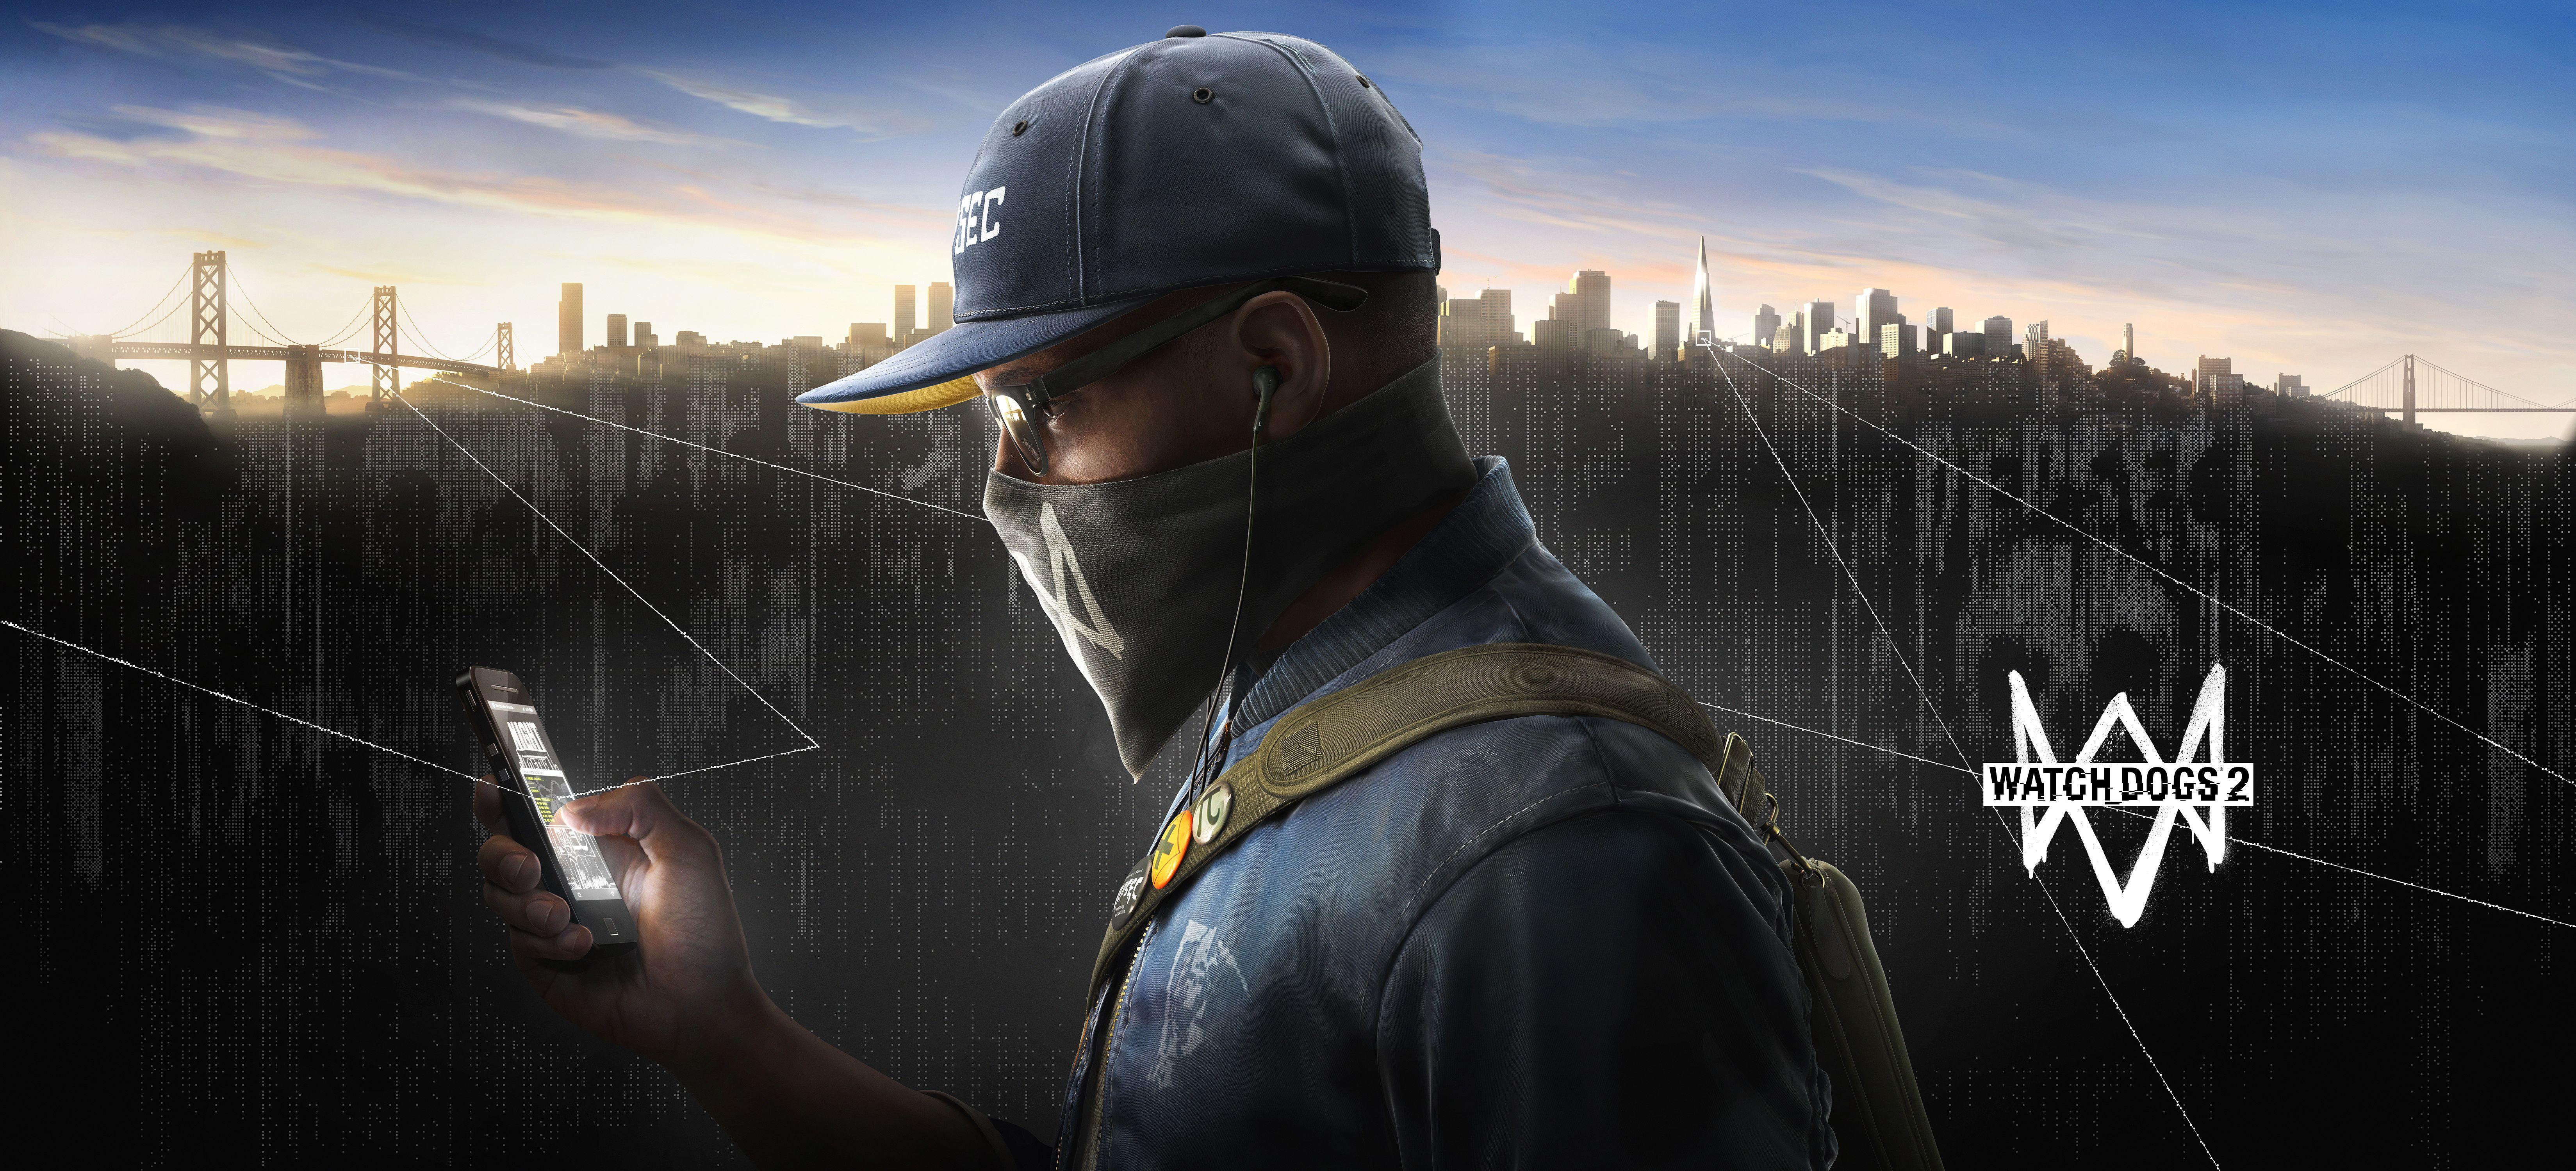 Watch Dogs 2 HD Wallpapers - Wallpaper Cave